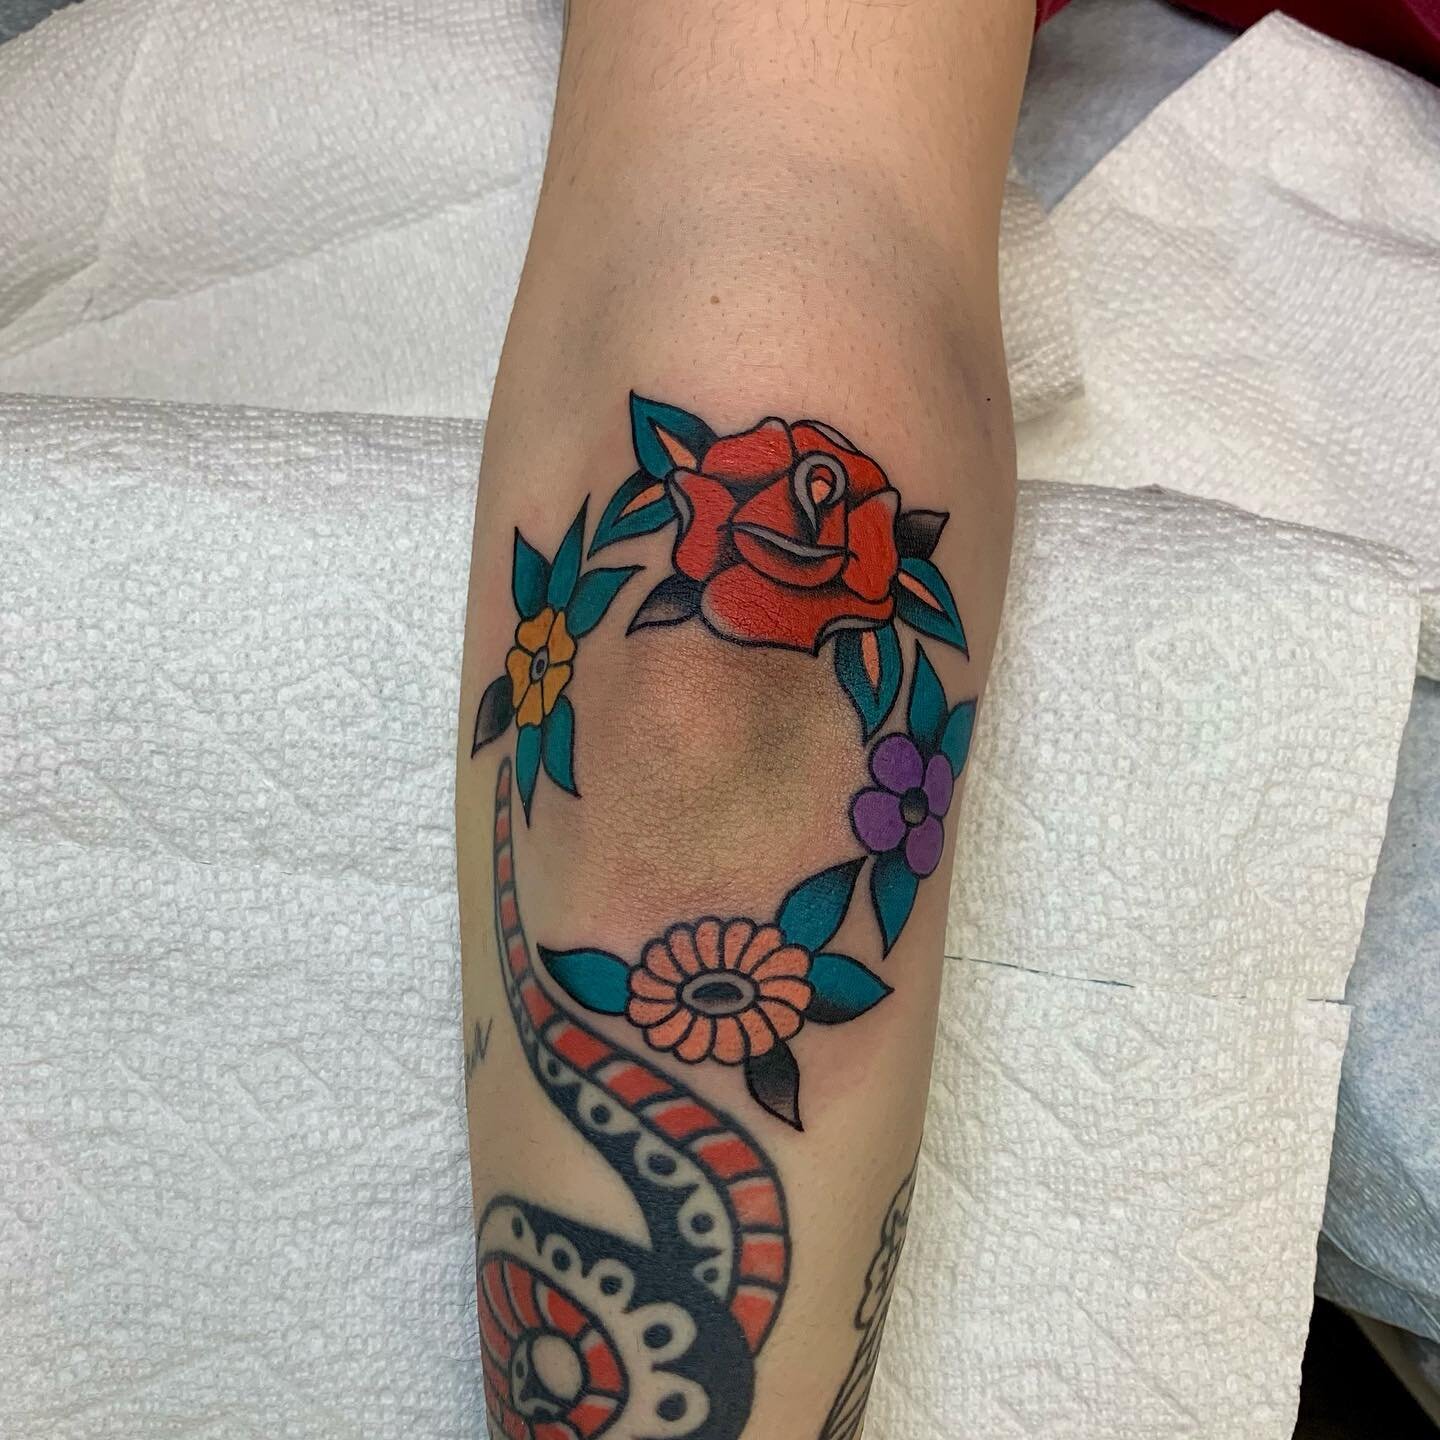 Decorated Sinead&rsquo;s elbow with a fun lil floral arrangement, thank you! Got a boring elbow? Let&rsquo;s jazz it up, DM or email for tattoos ✌️

#elbowtattoo #armtattoo #tradworkers #traditionaltattoo #floraltattoo #flowers #colourtattoo #vancouv